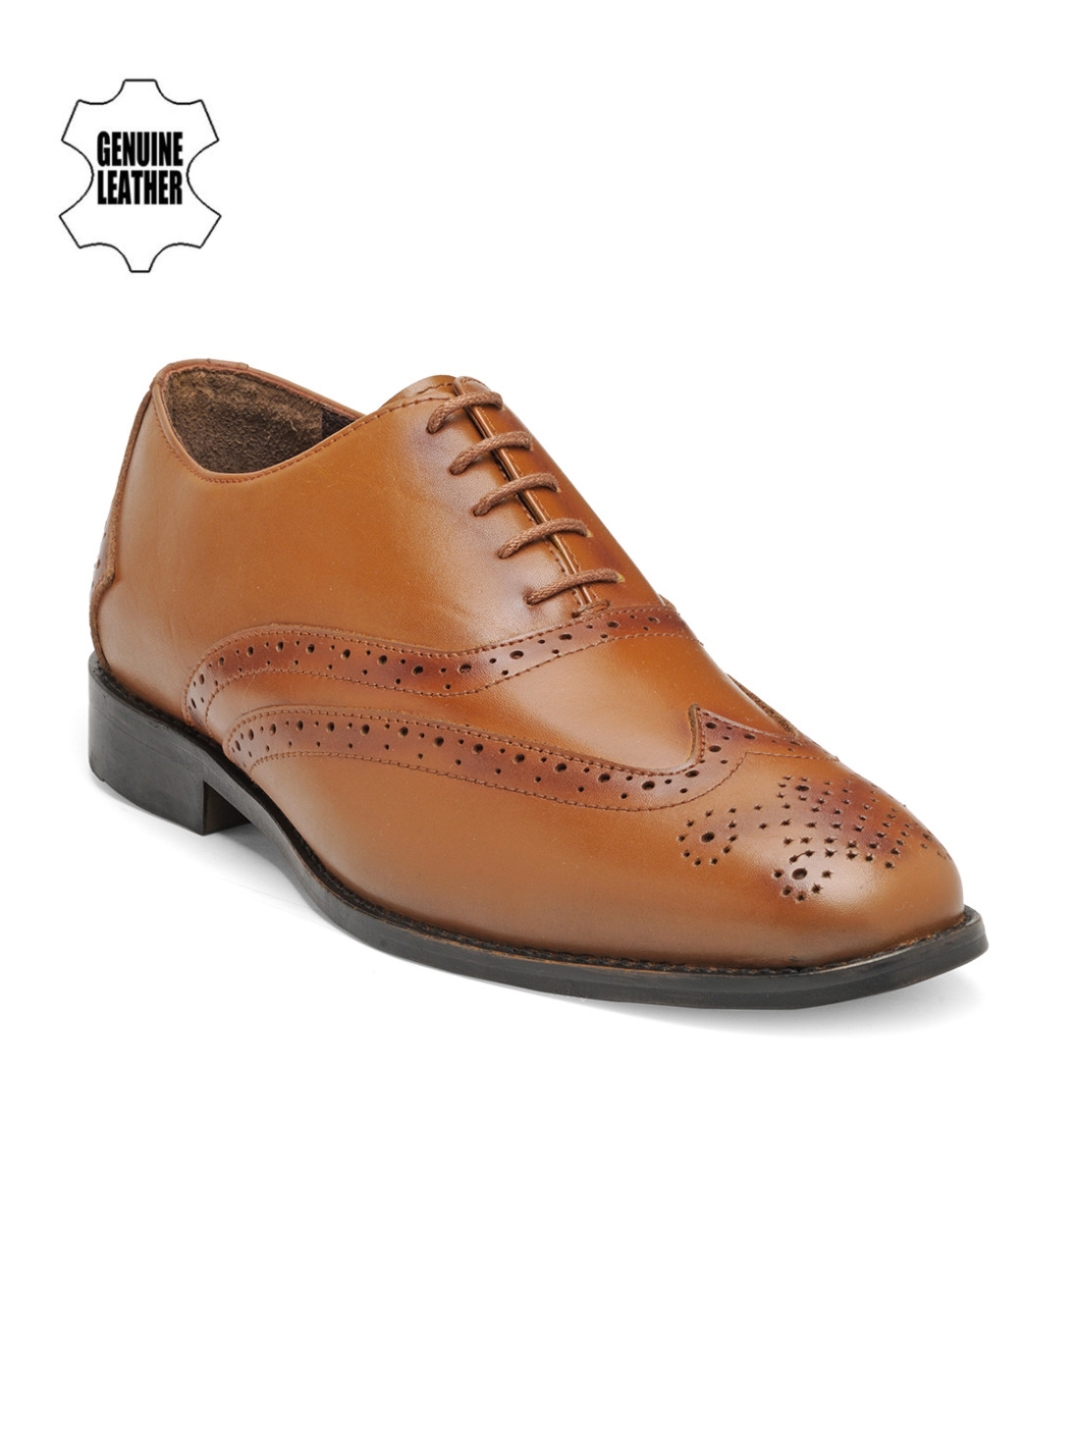 Buy Teakwood Leathers Men Tan Brown Leather Oxford Shoes - Formal Shoes